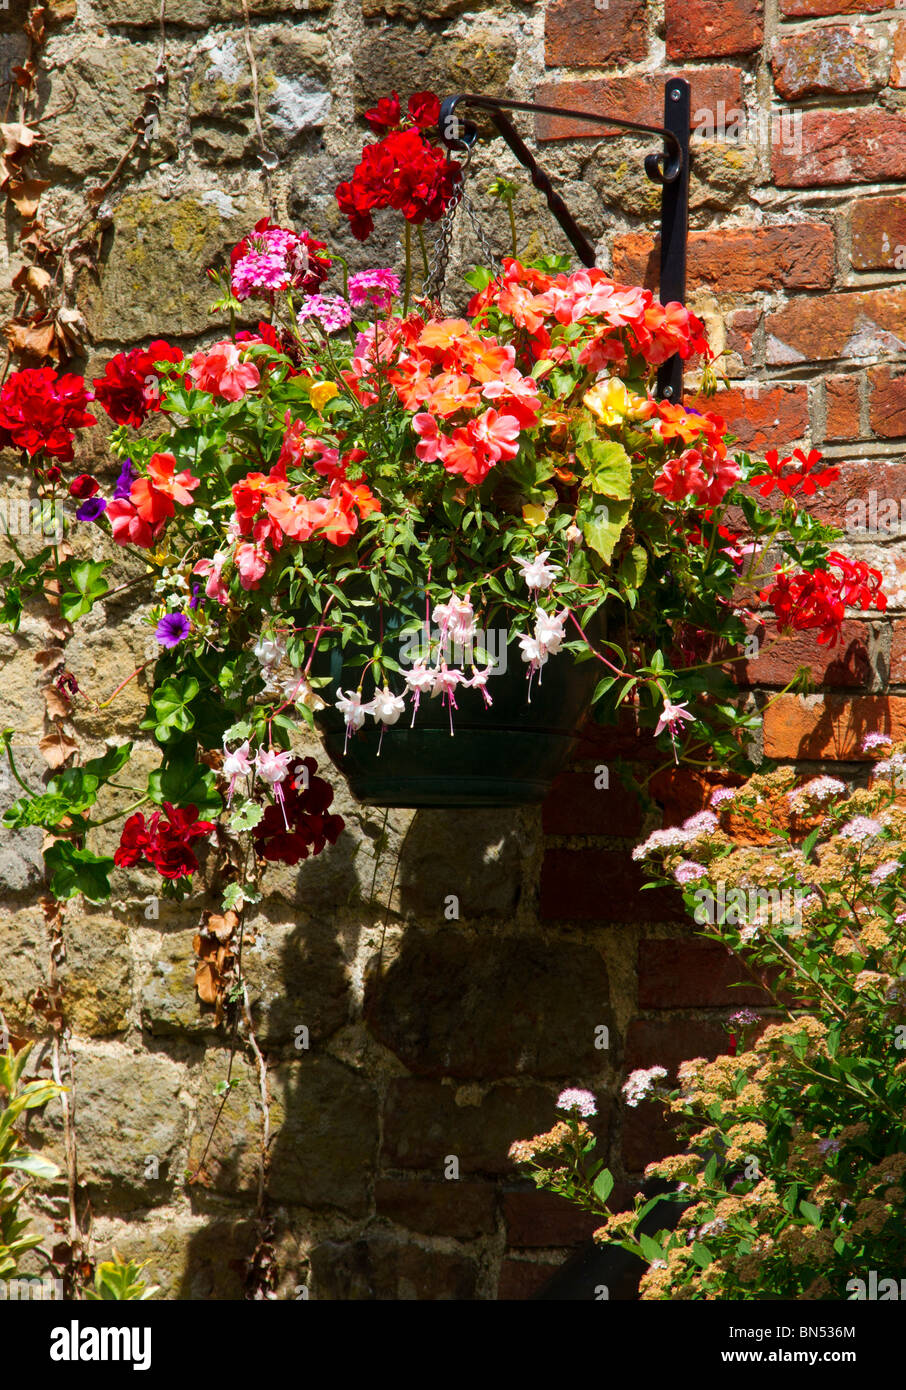 Colourful floral hanging basket fixed to old brick wall and containing Petunias, Fuchsia, Pelargonium and Busy Lizzies in British garden Stock Photo